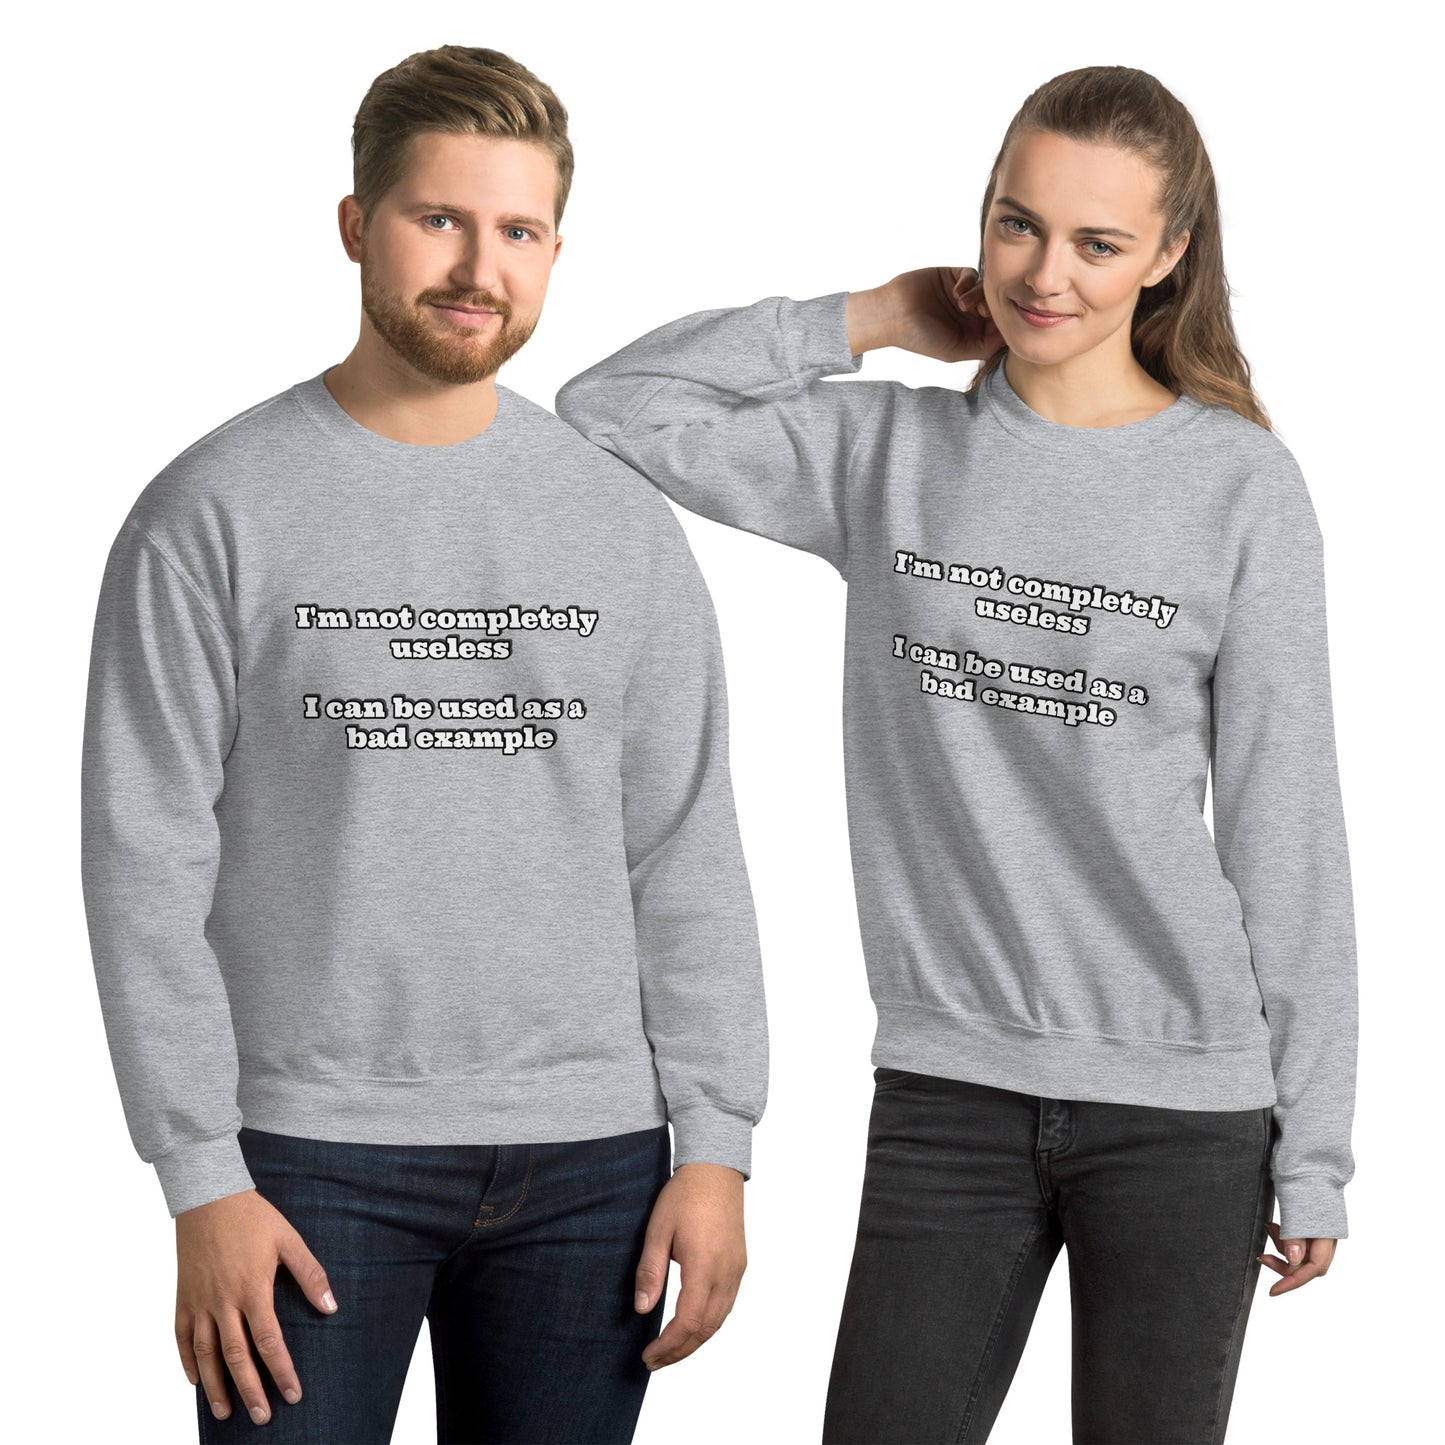 Man and women with grey sweatshirt with text “I'm not completely useless I can be used as a bad example”